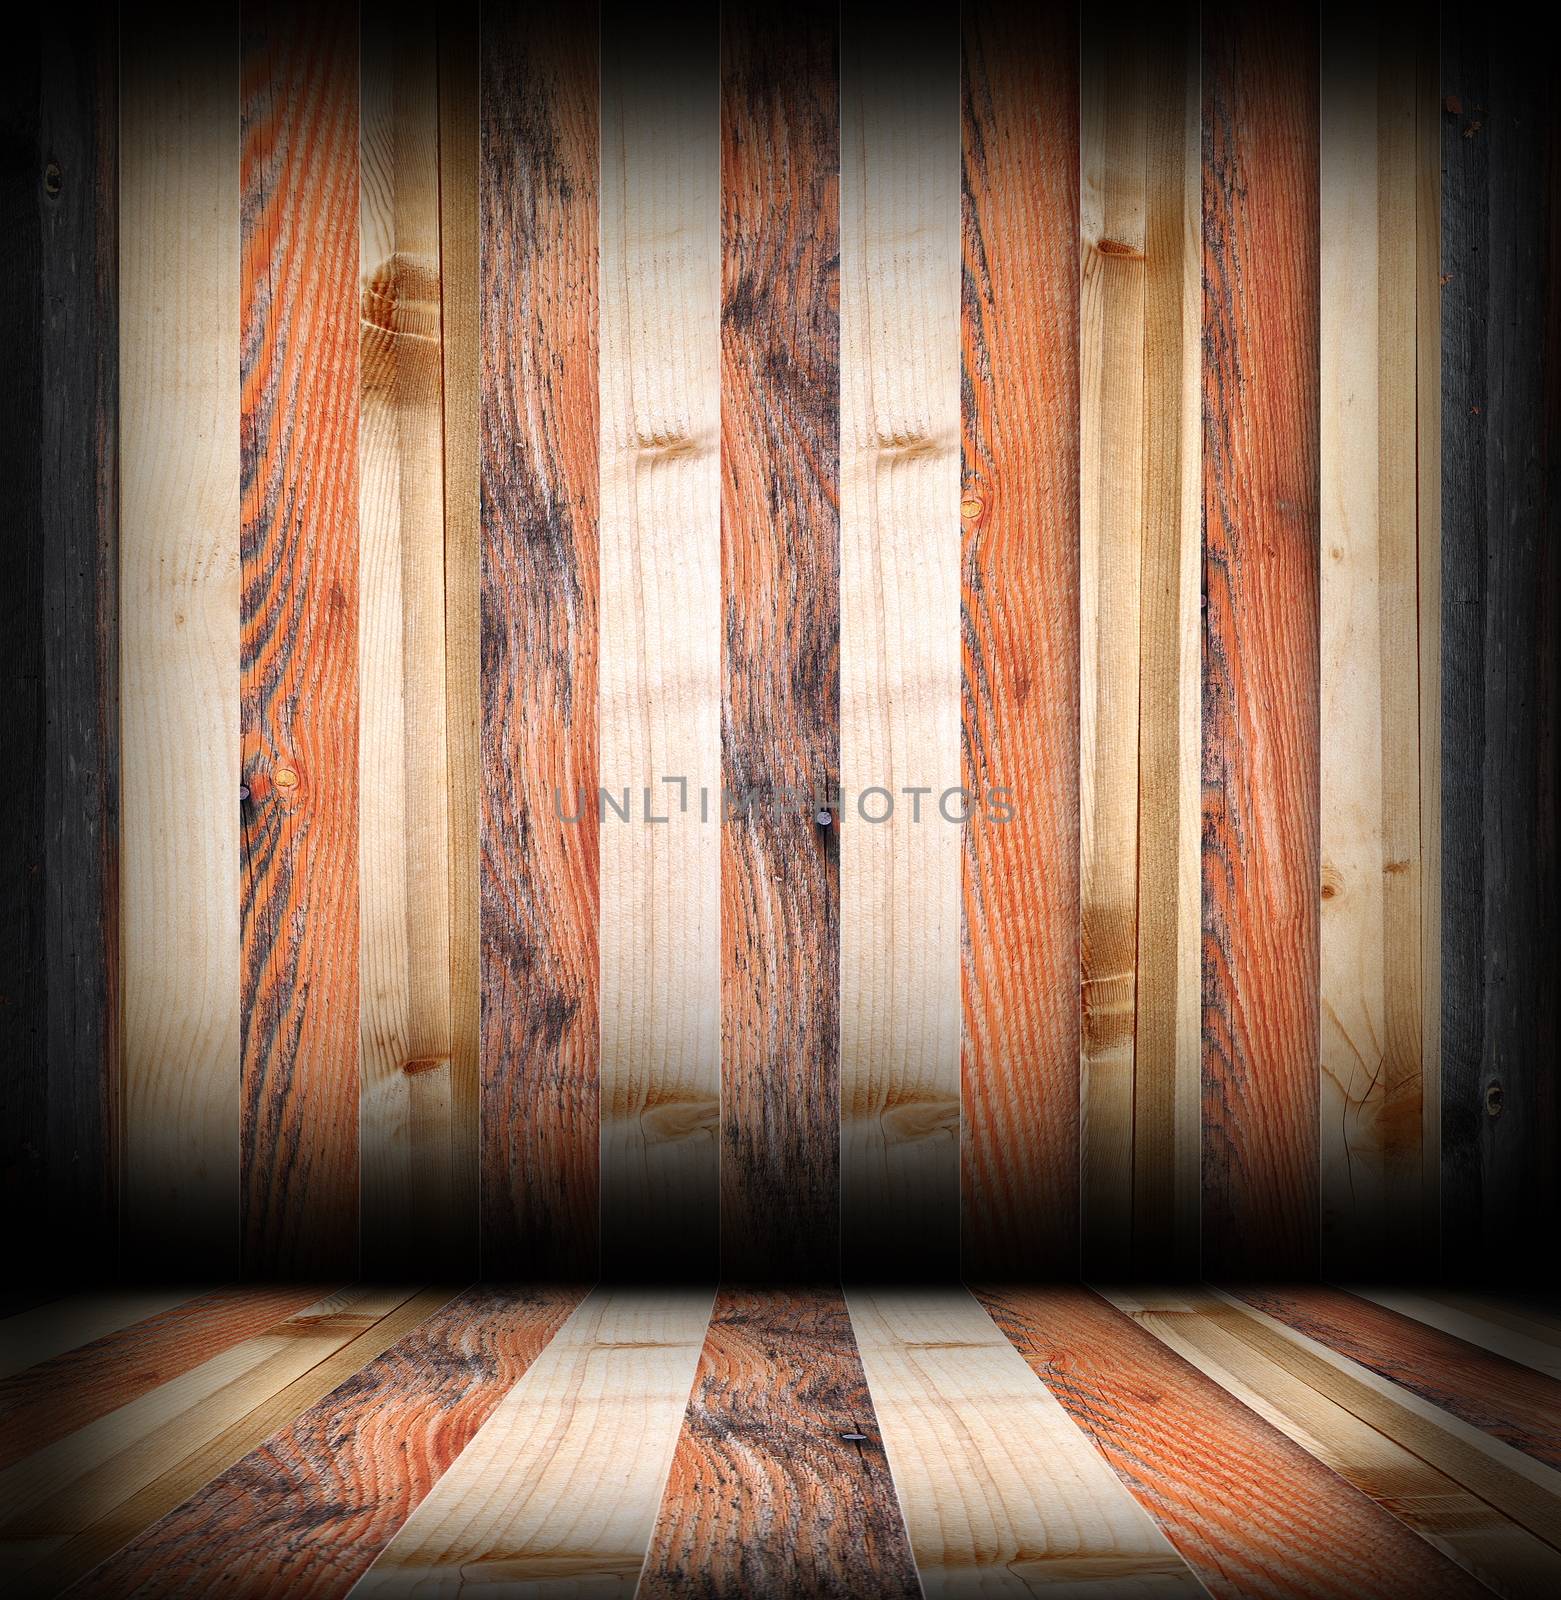 striped wooden boards finishing on interior room backdrop, floor and wall